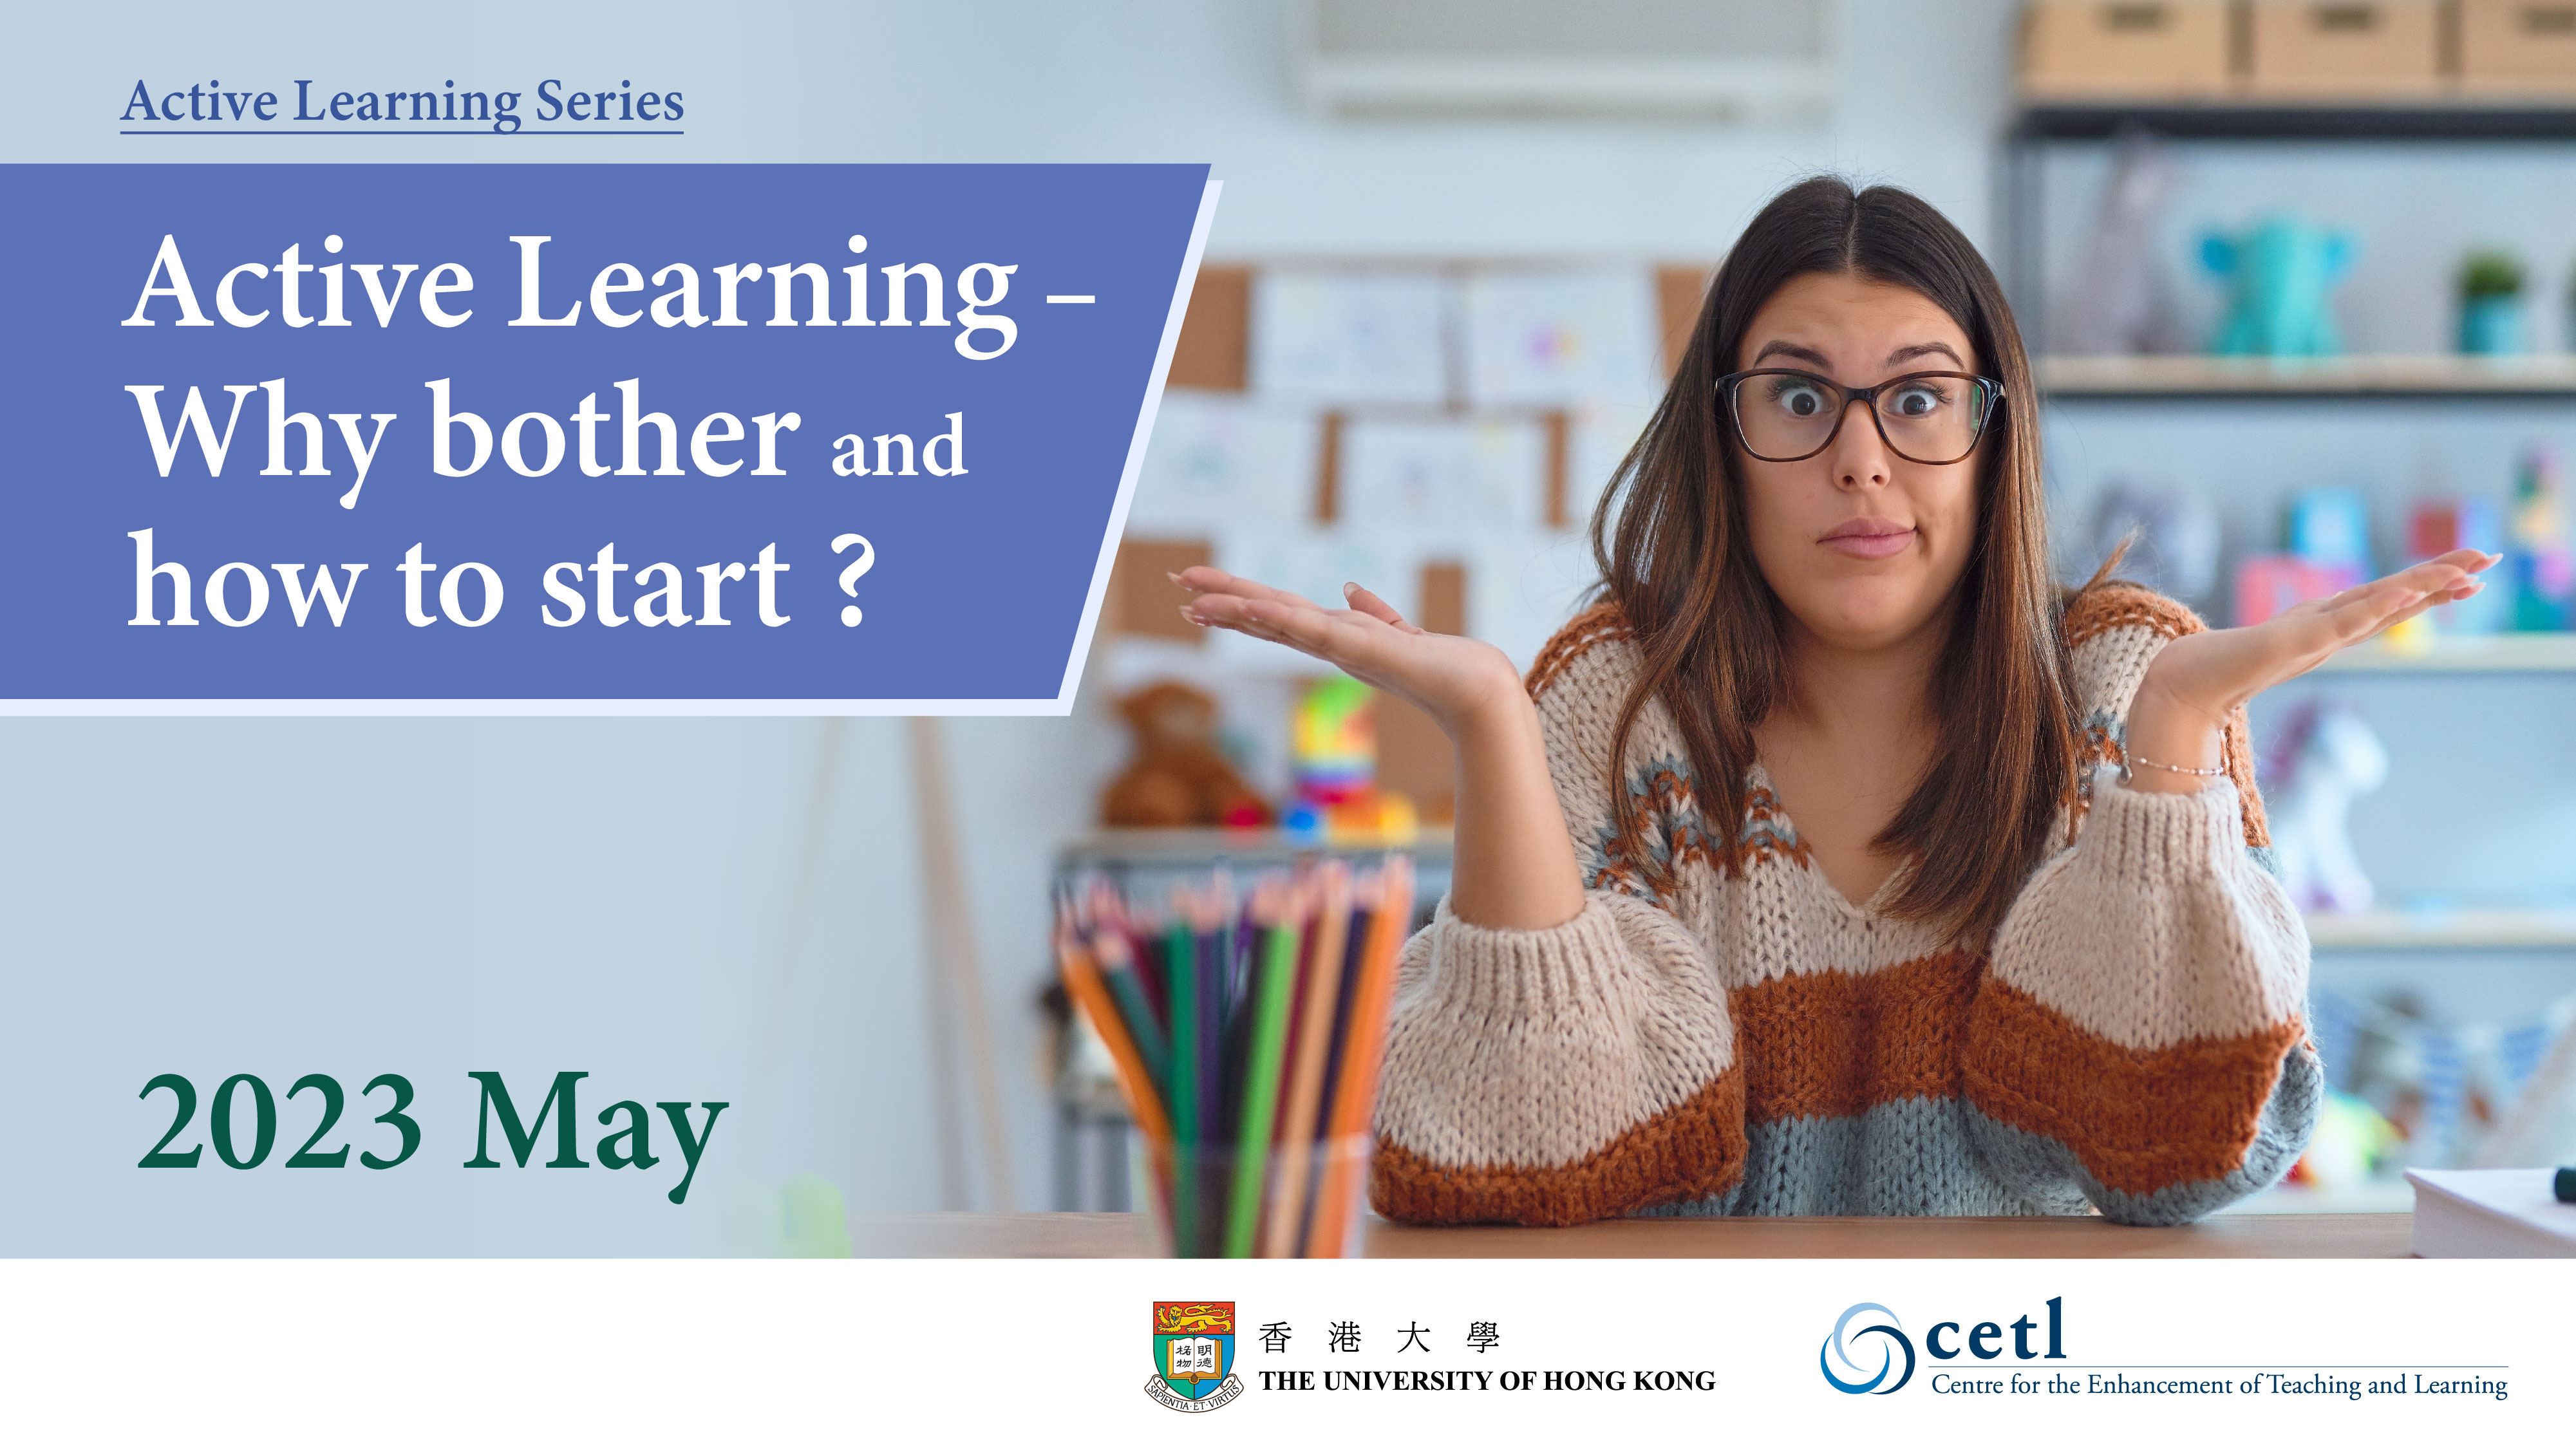 Active Learning Series: Active Learning – Why bother and how to start?